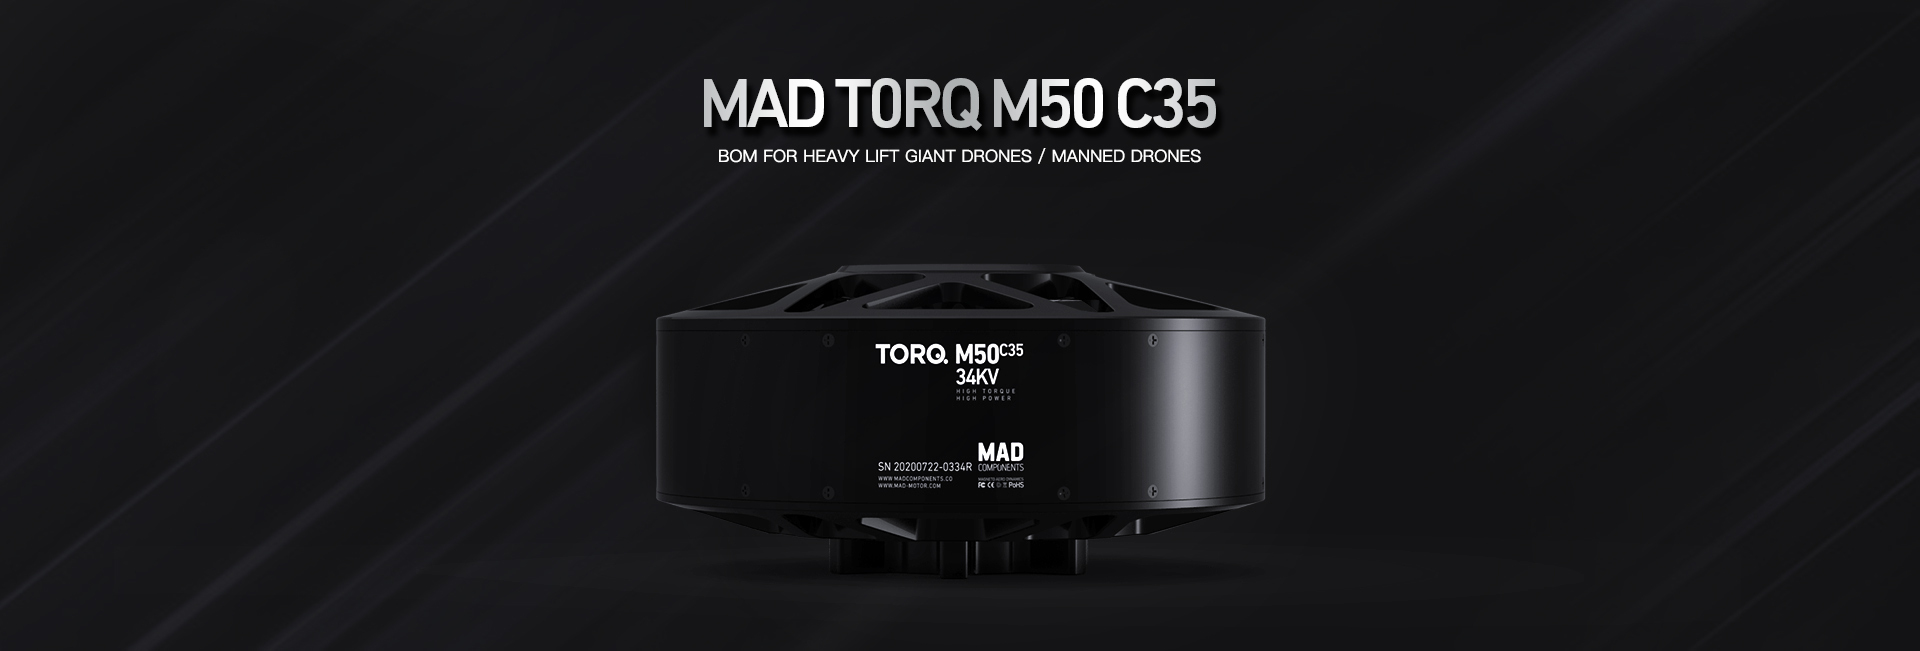 MAD M50C35 PRO EEE ENTHUSIASTS EXTREME EDITION Long Range Drone Propulsion System